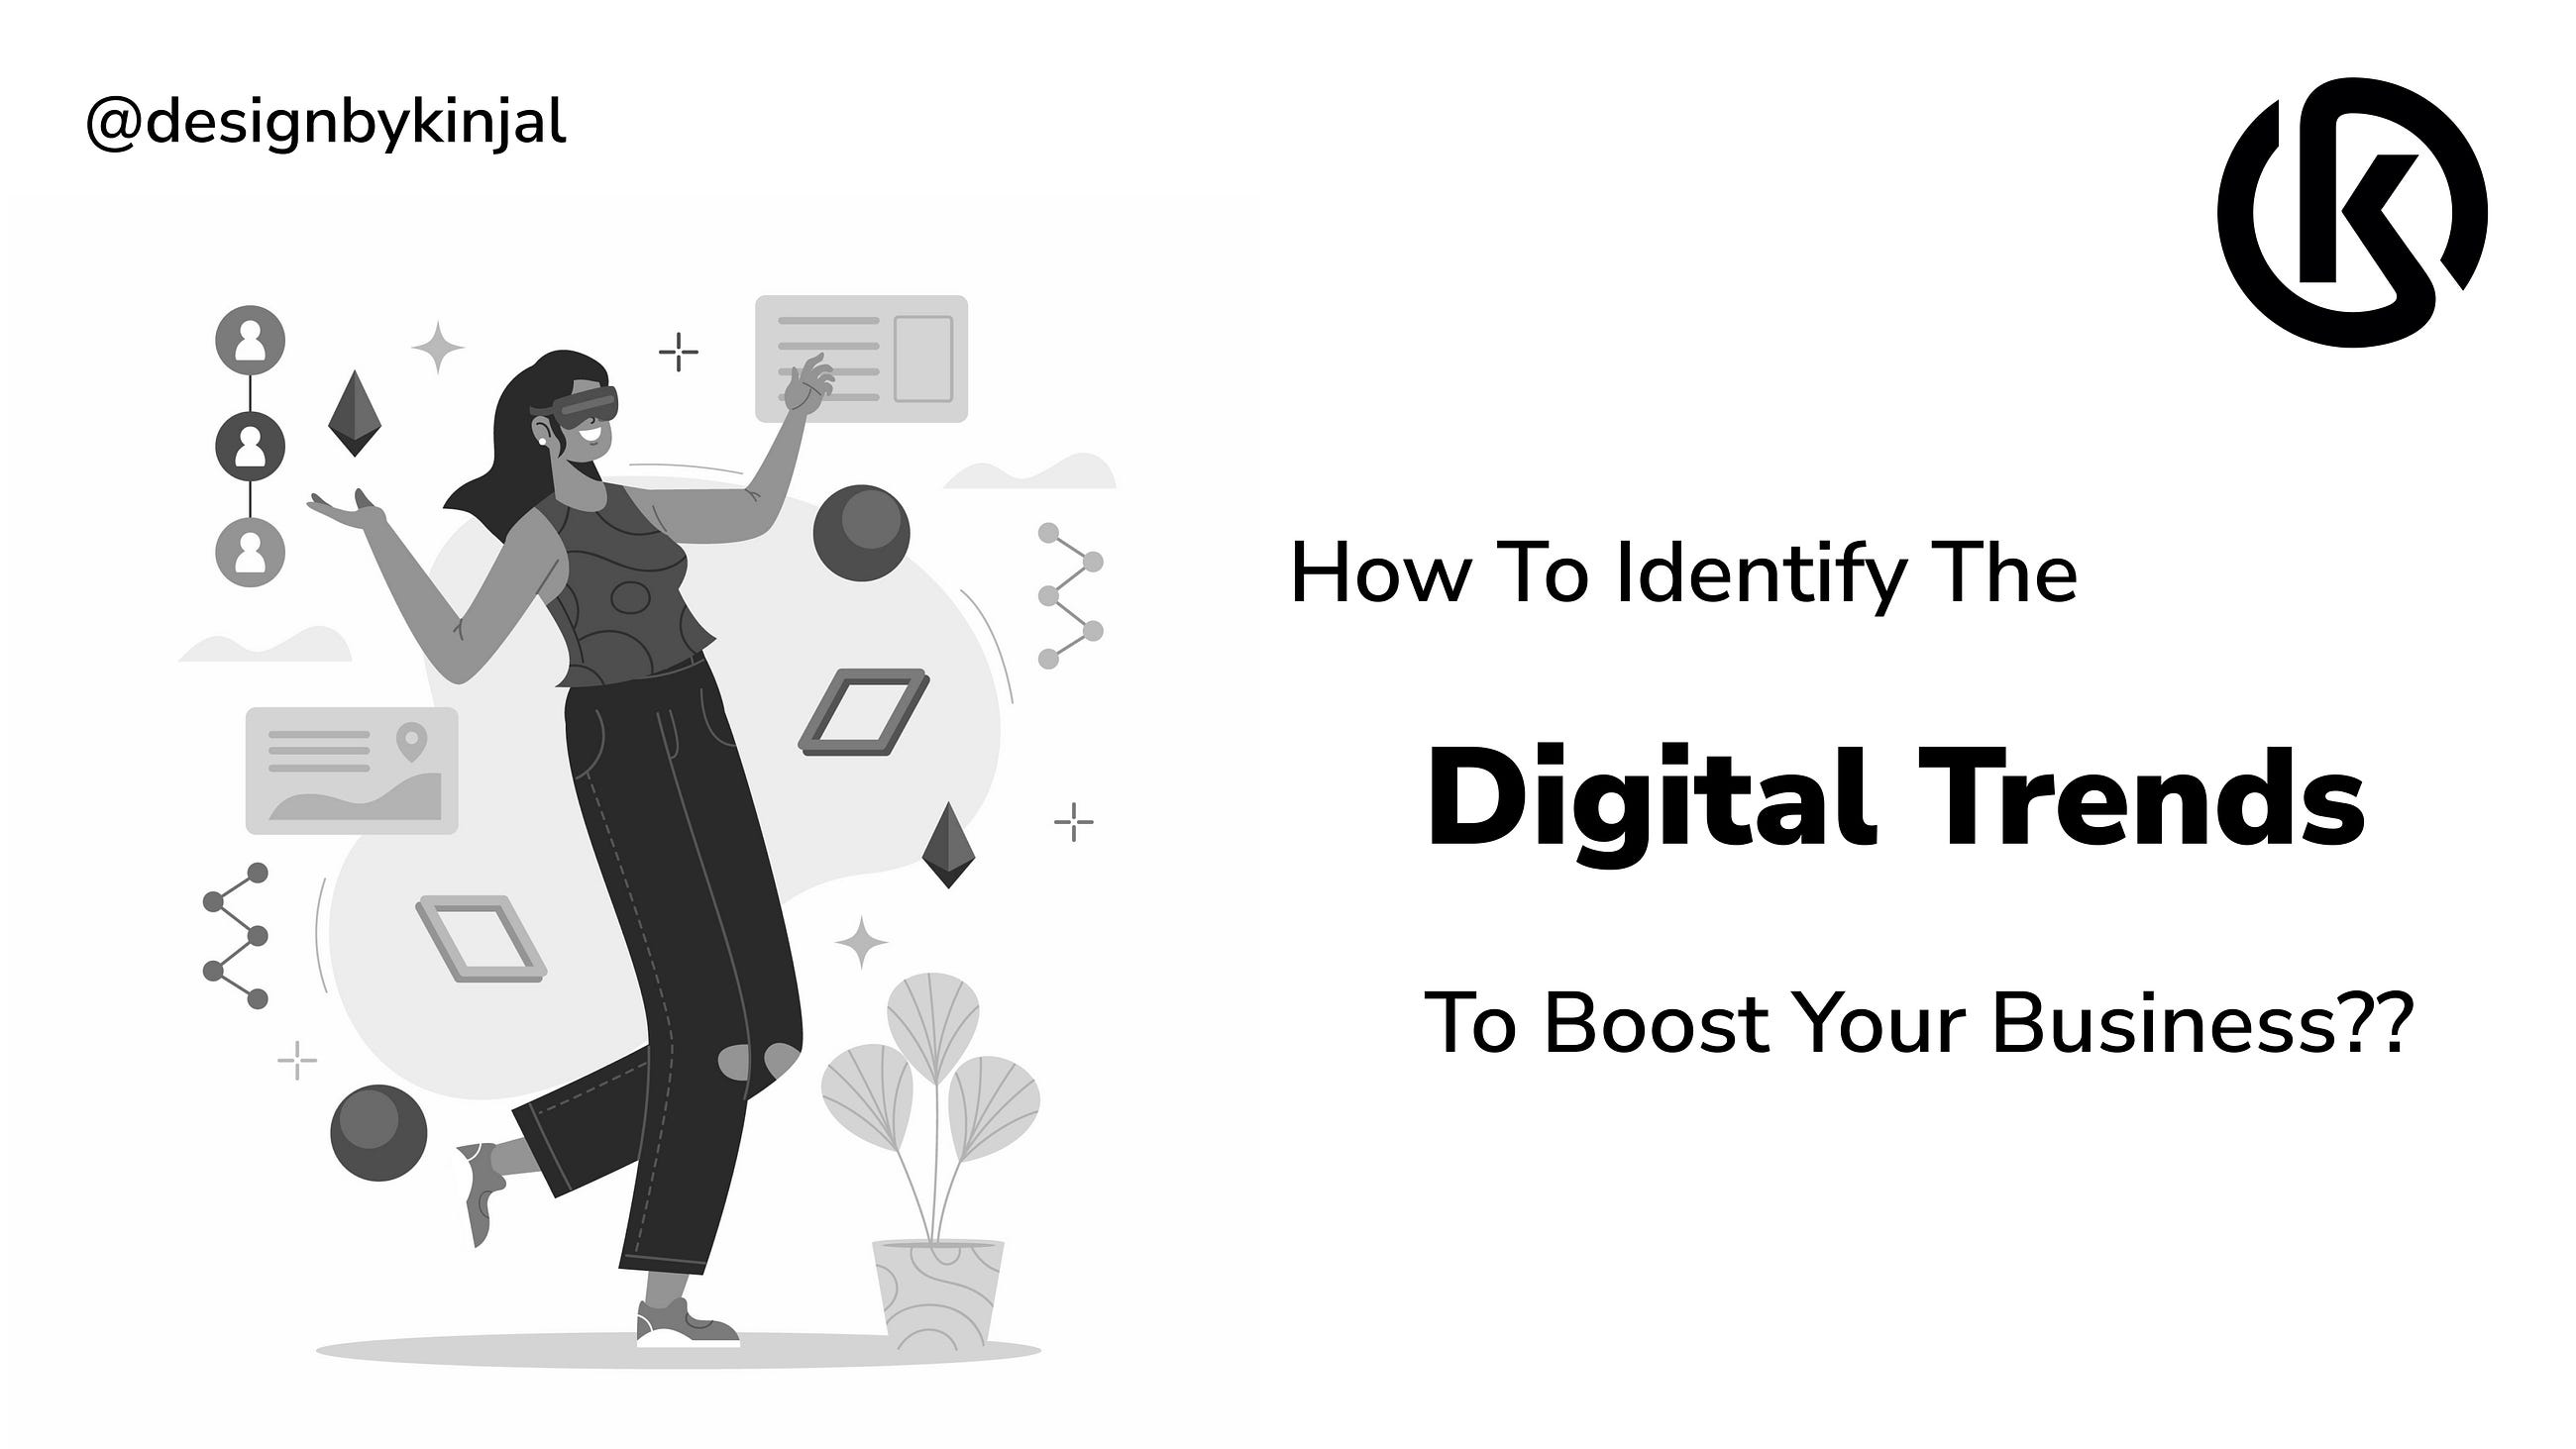 How To Identify The Digital Trends To Boost Your Business??